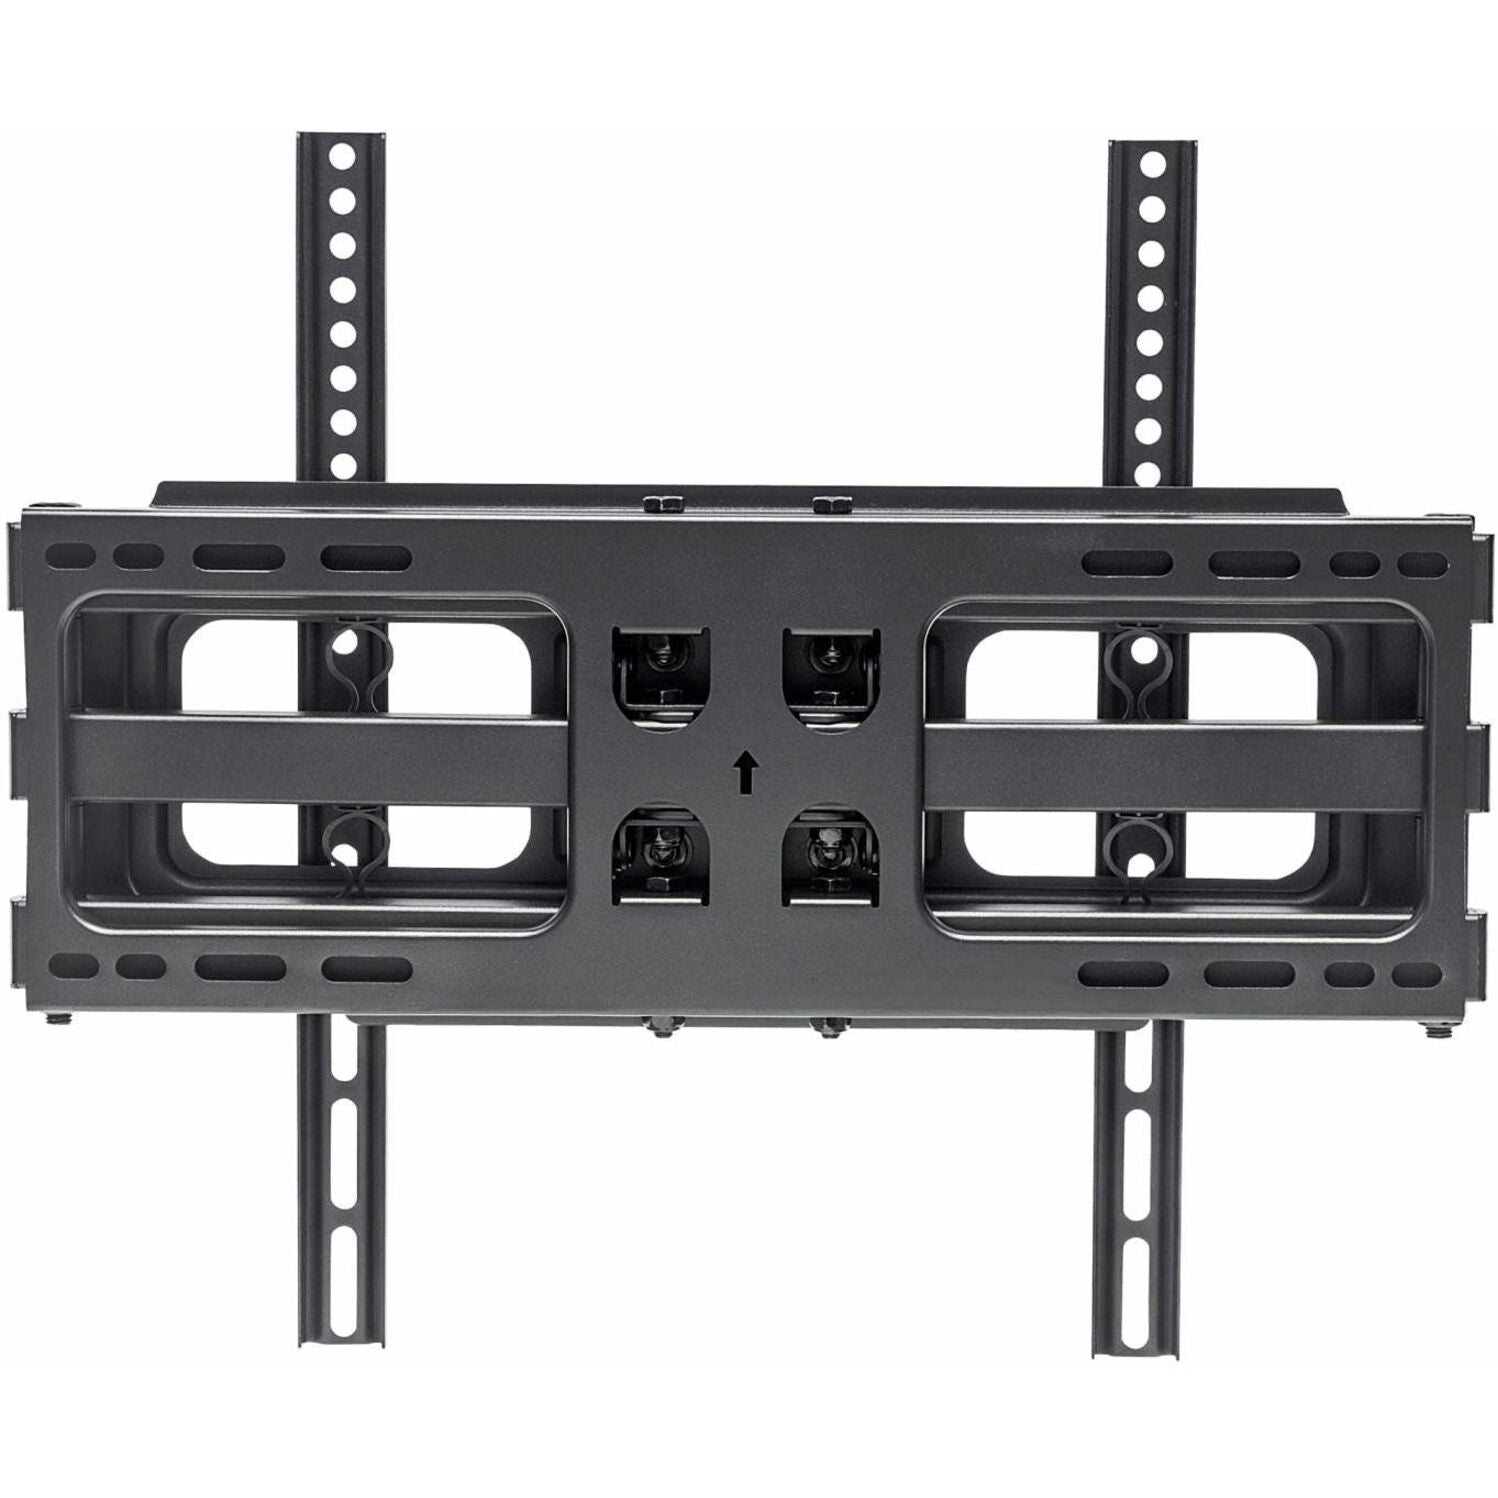 Manhattan 461344 Universal Basic LCD Full-Motion Wall Mount, Supports TVs up to 55", 88 lb Capacity